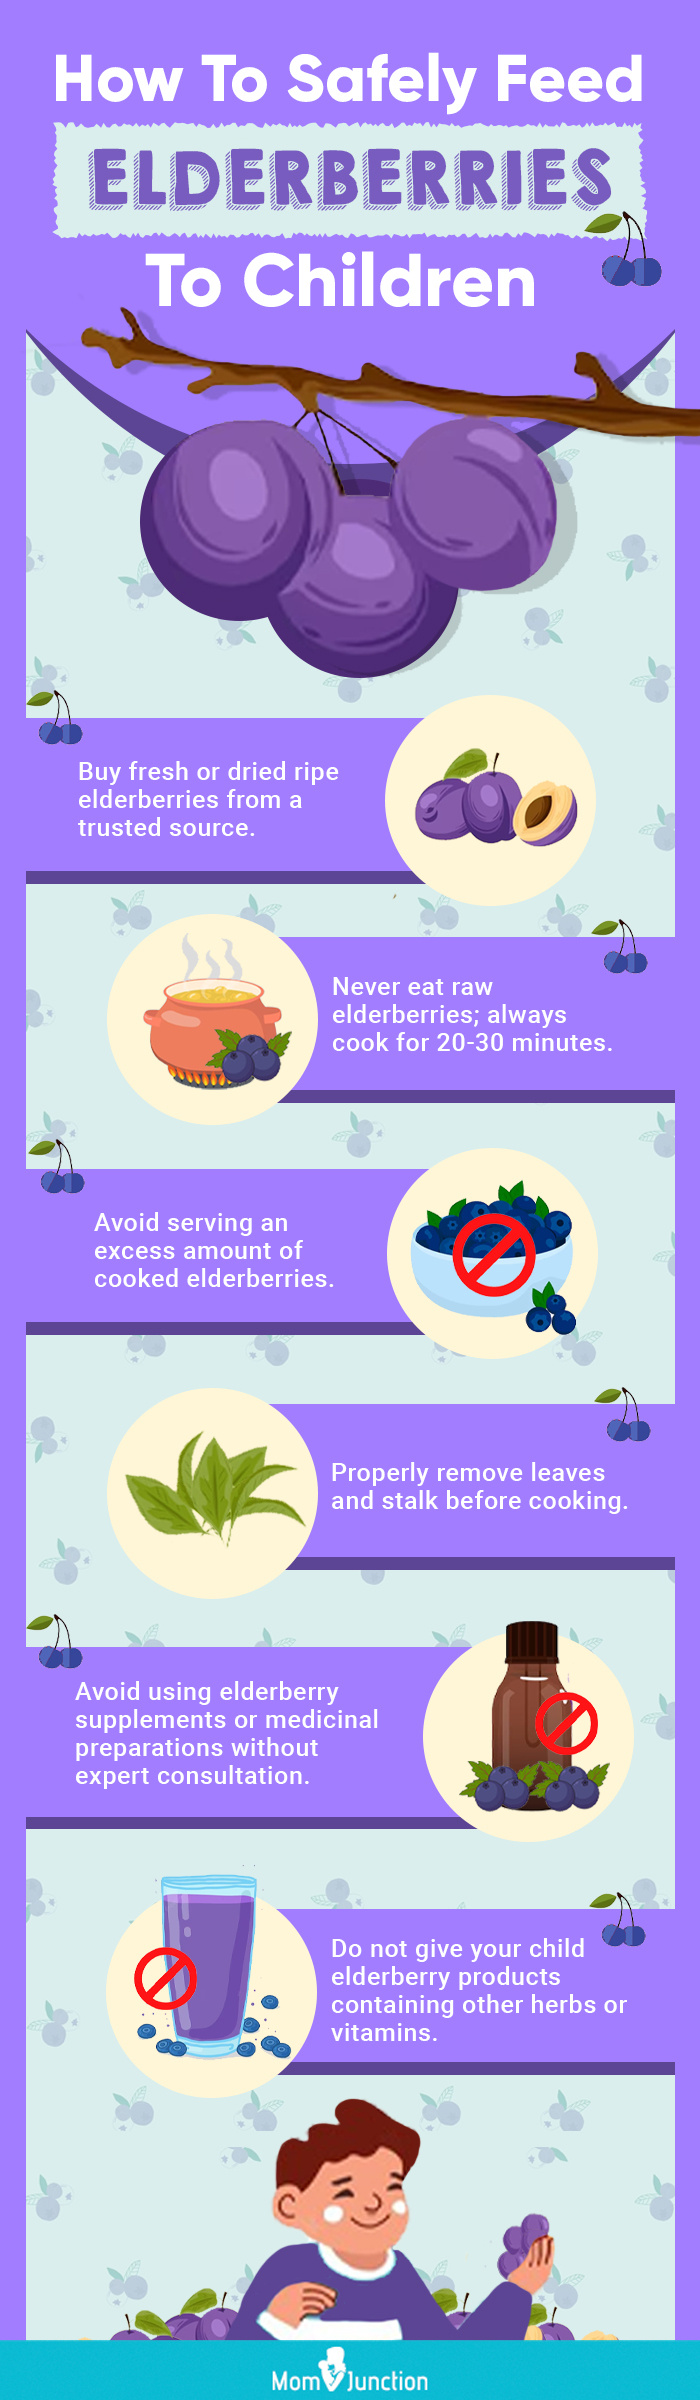 how to safely feed elderberries to children (infographic)